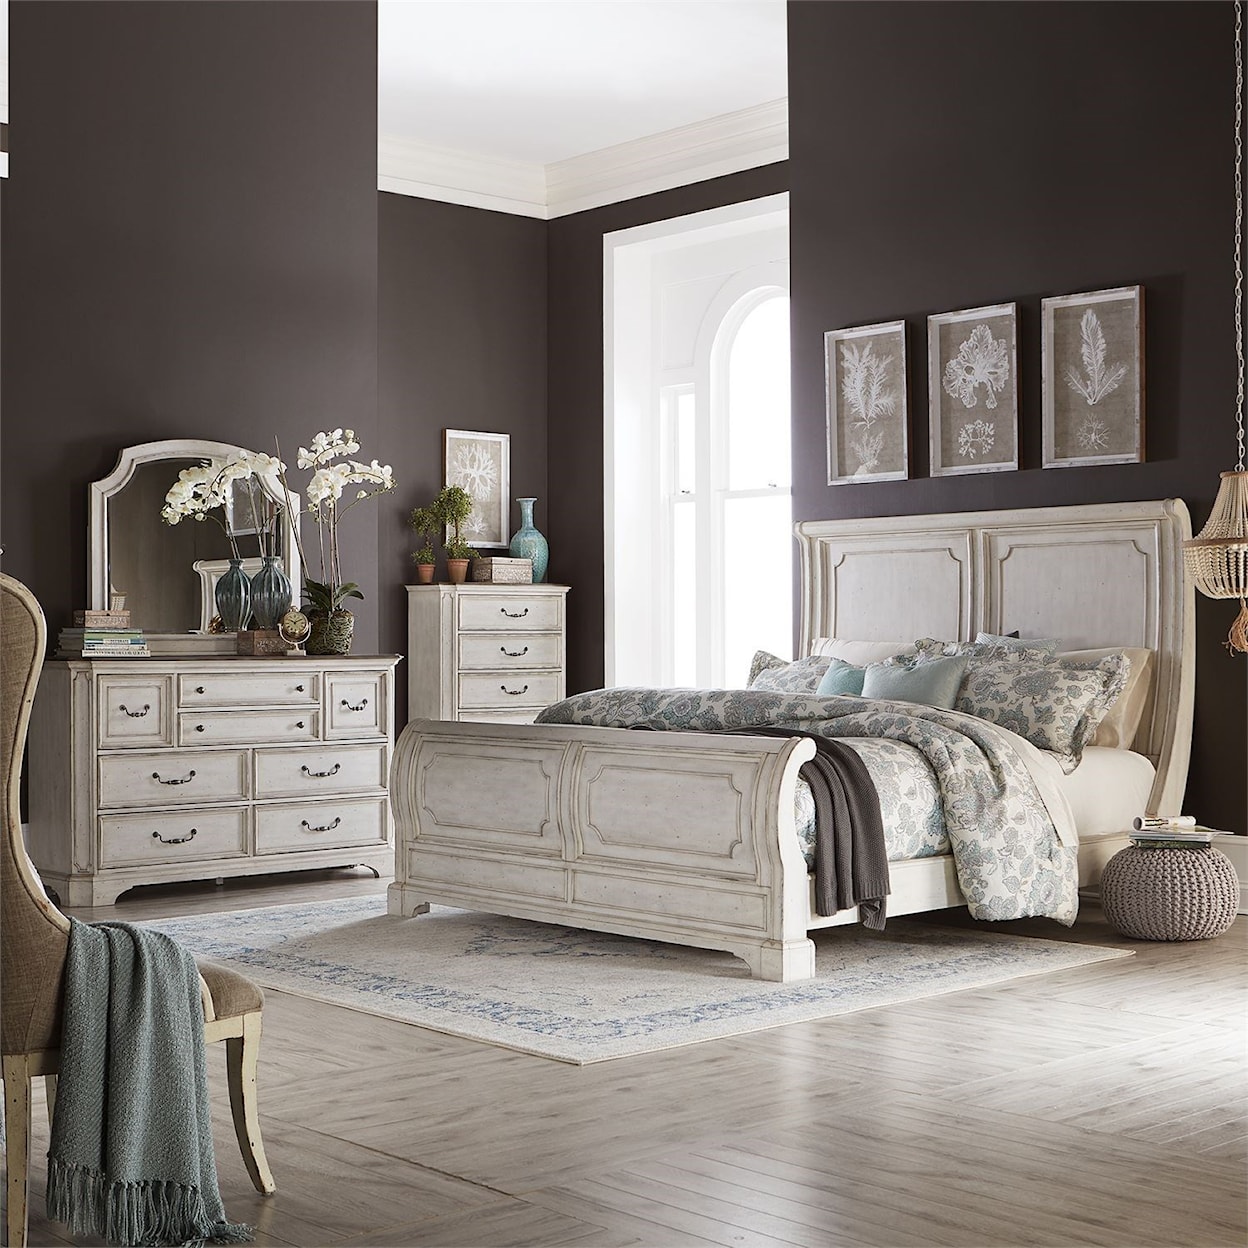 Liberty Furniture Abbey Road King Bedroom Group